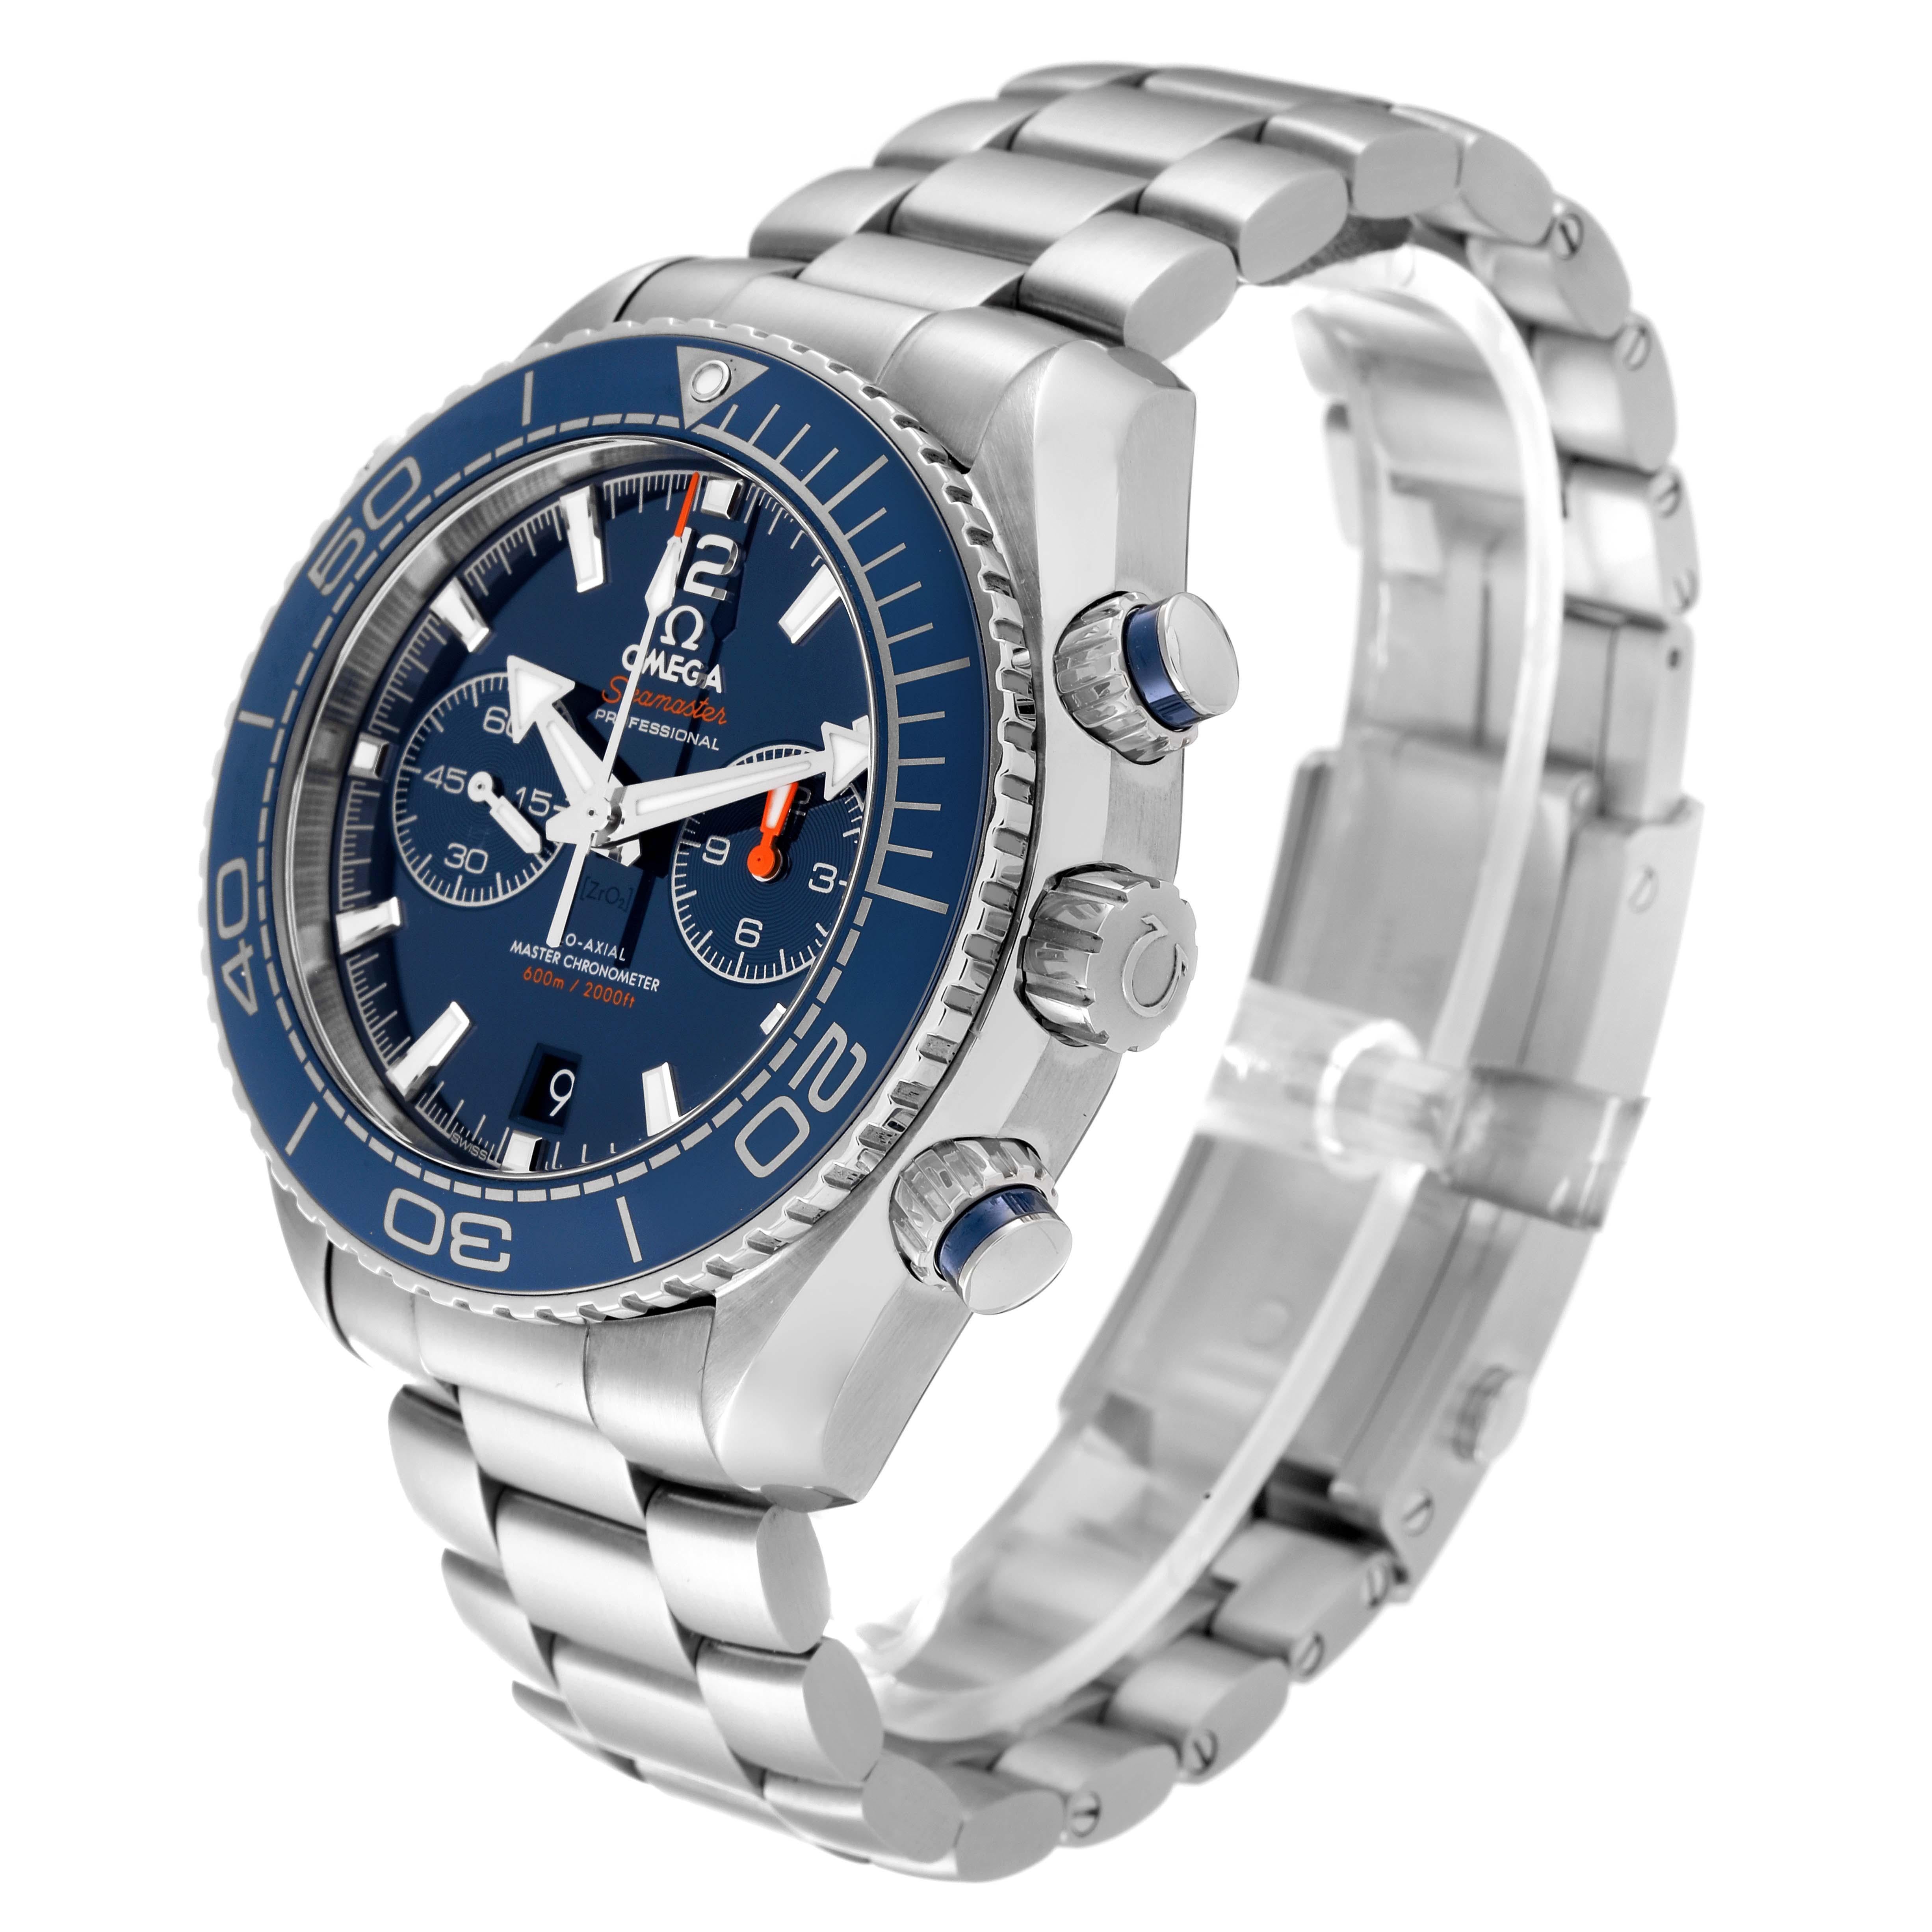 Men's Omega Planet Ocean Chronograph Blue Dial Mens Watch 215.30.46.51.03.001 Box Card For Sale